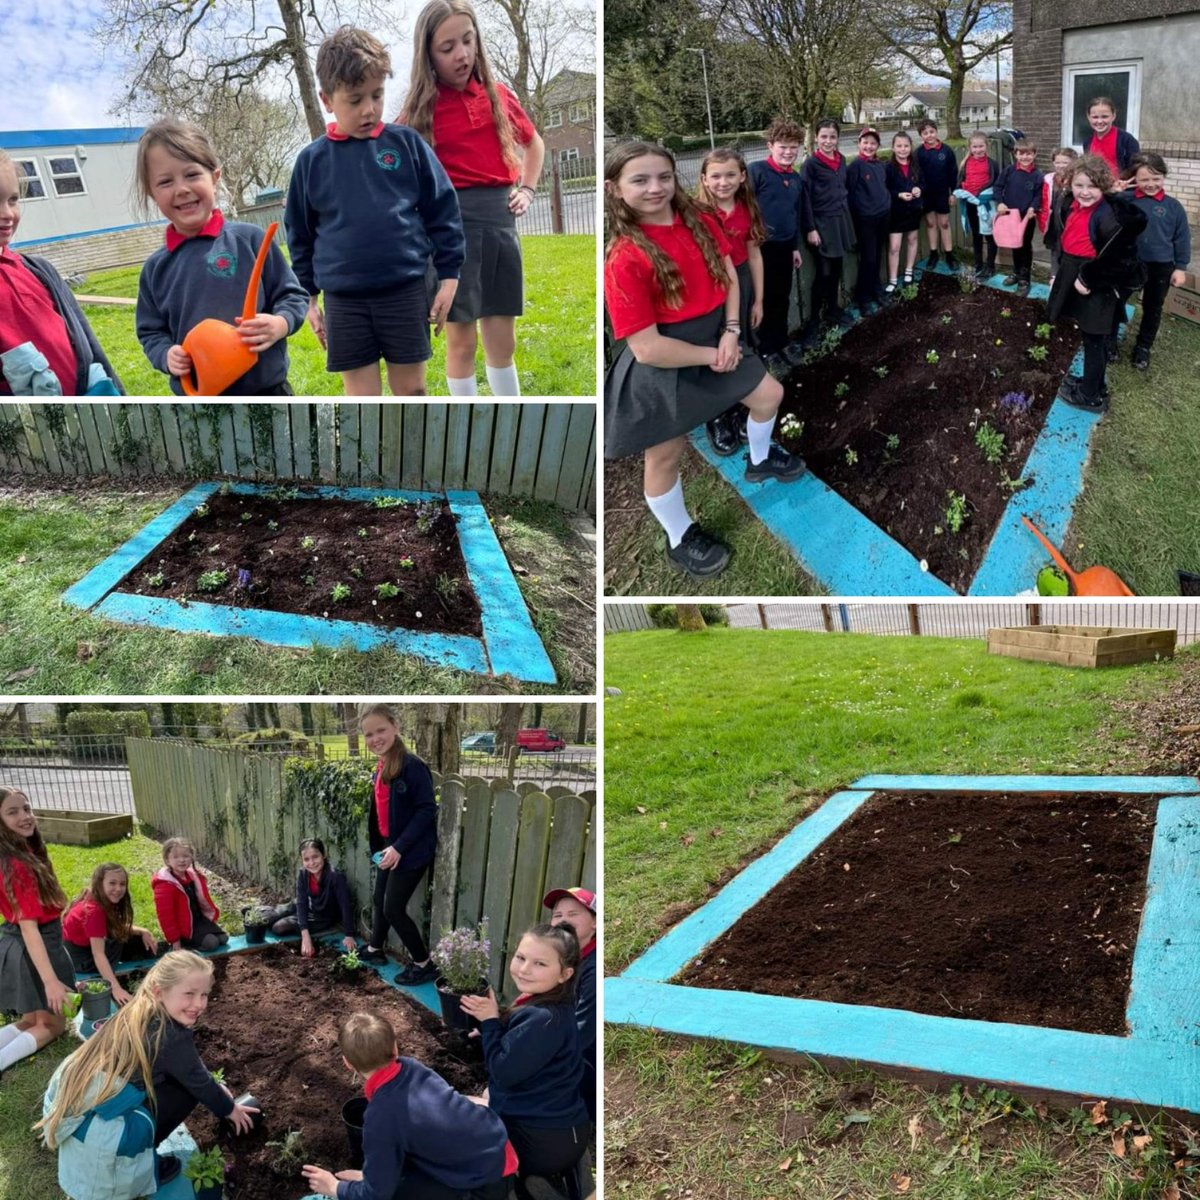 School Council have been very busy!. They have planted new plants in our recently rejuvenated flower bed in the YR/Y1 outdoor area. Huge shout out to Mr & Mrs Adams for painting the flower bed frame over the weekend. One step closer to our Manx Wildlife Trust Schools Award….!